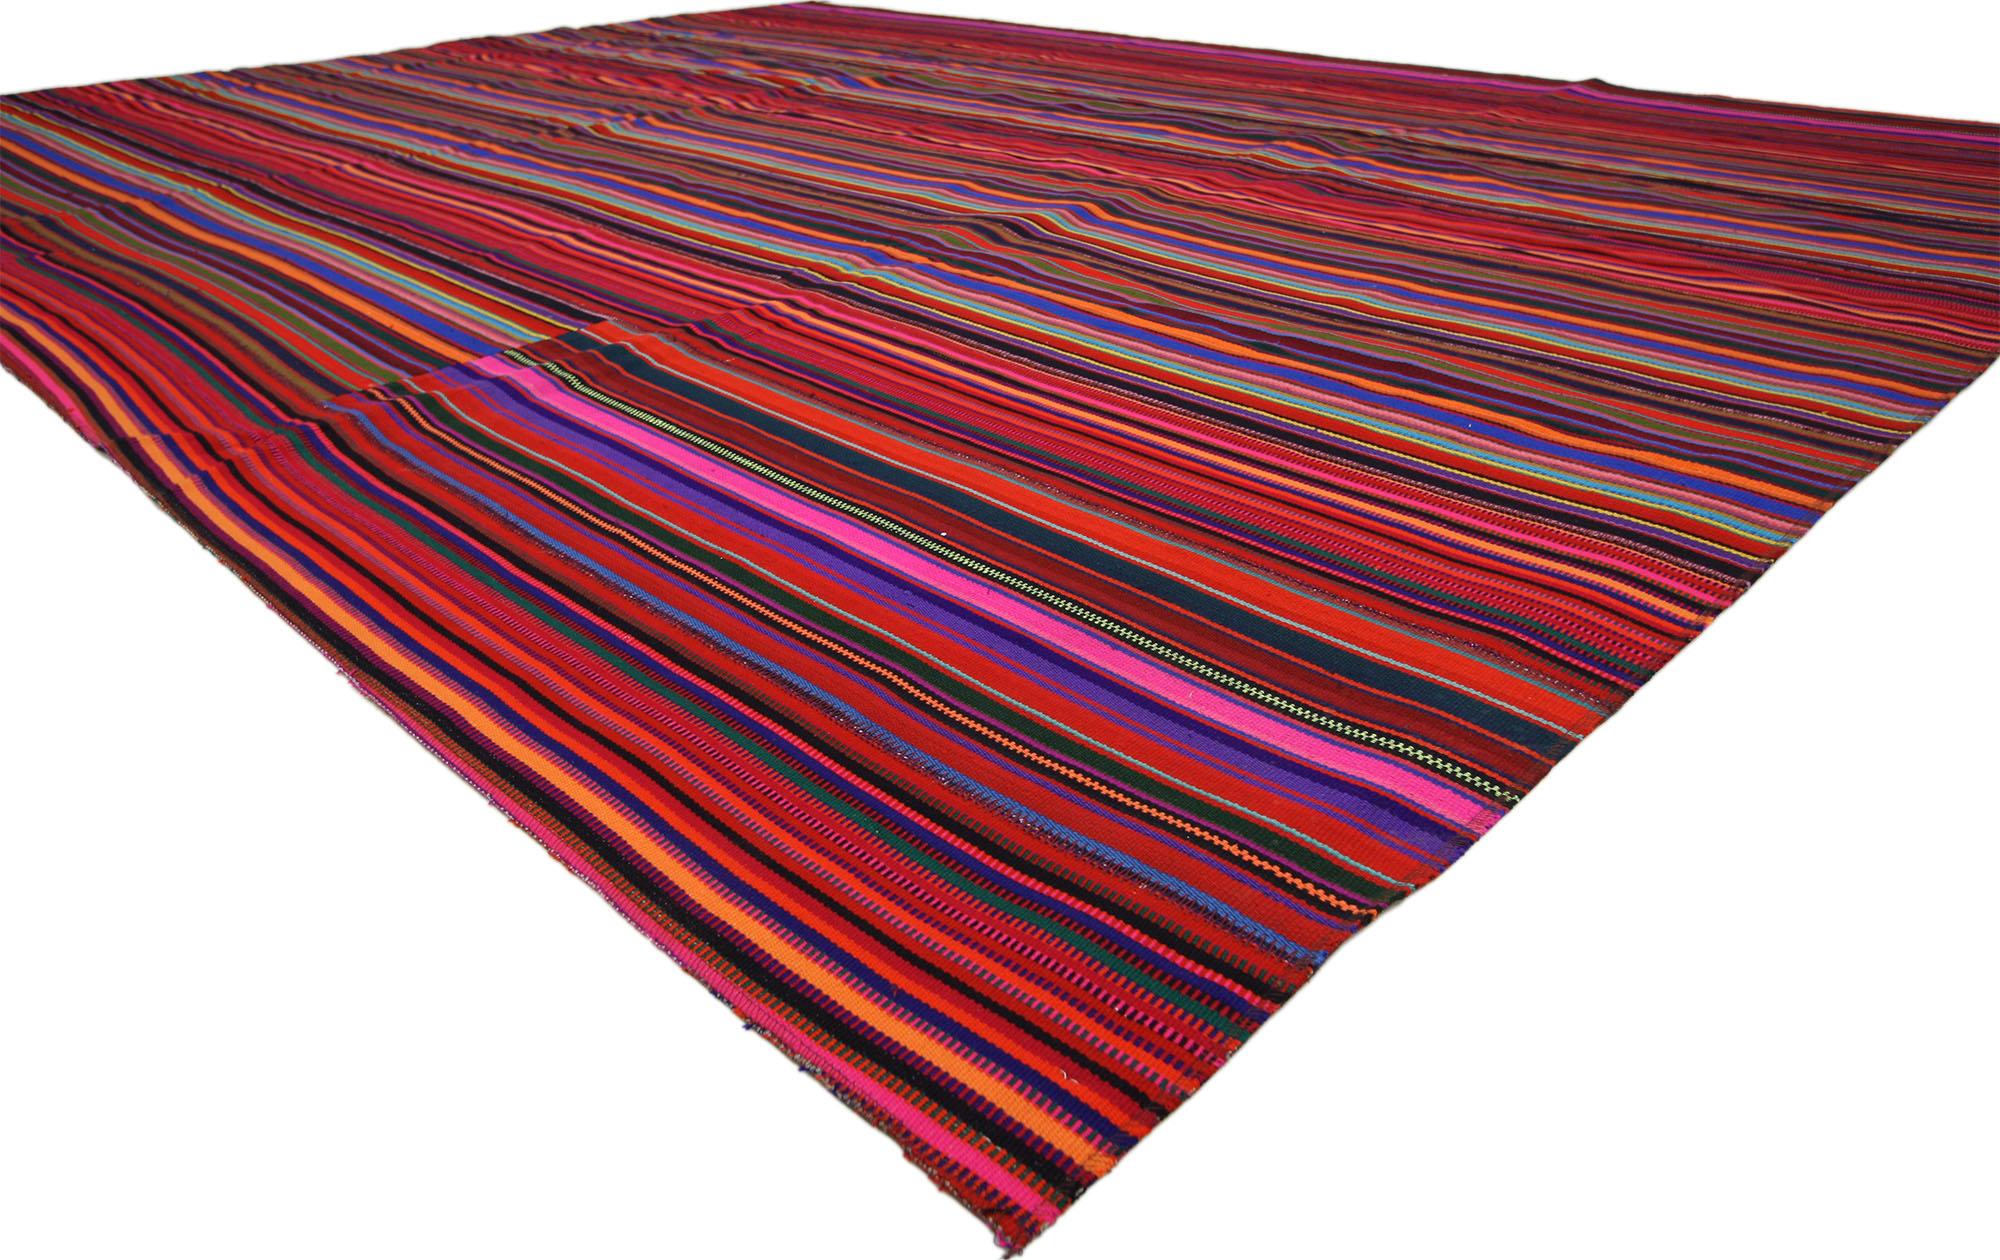 60790 Vintage Turkish Striped Kilim Rug with Modern Cabin Style 09'08 x 12'08. With its modern style and rugged beauty, this hand-woven wool vintage Turkish striped kilim rug manages to meld contemporary, modern, and traditional design elements. The